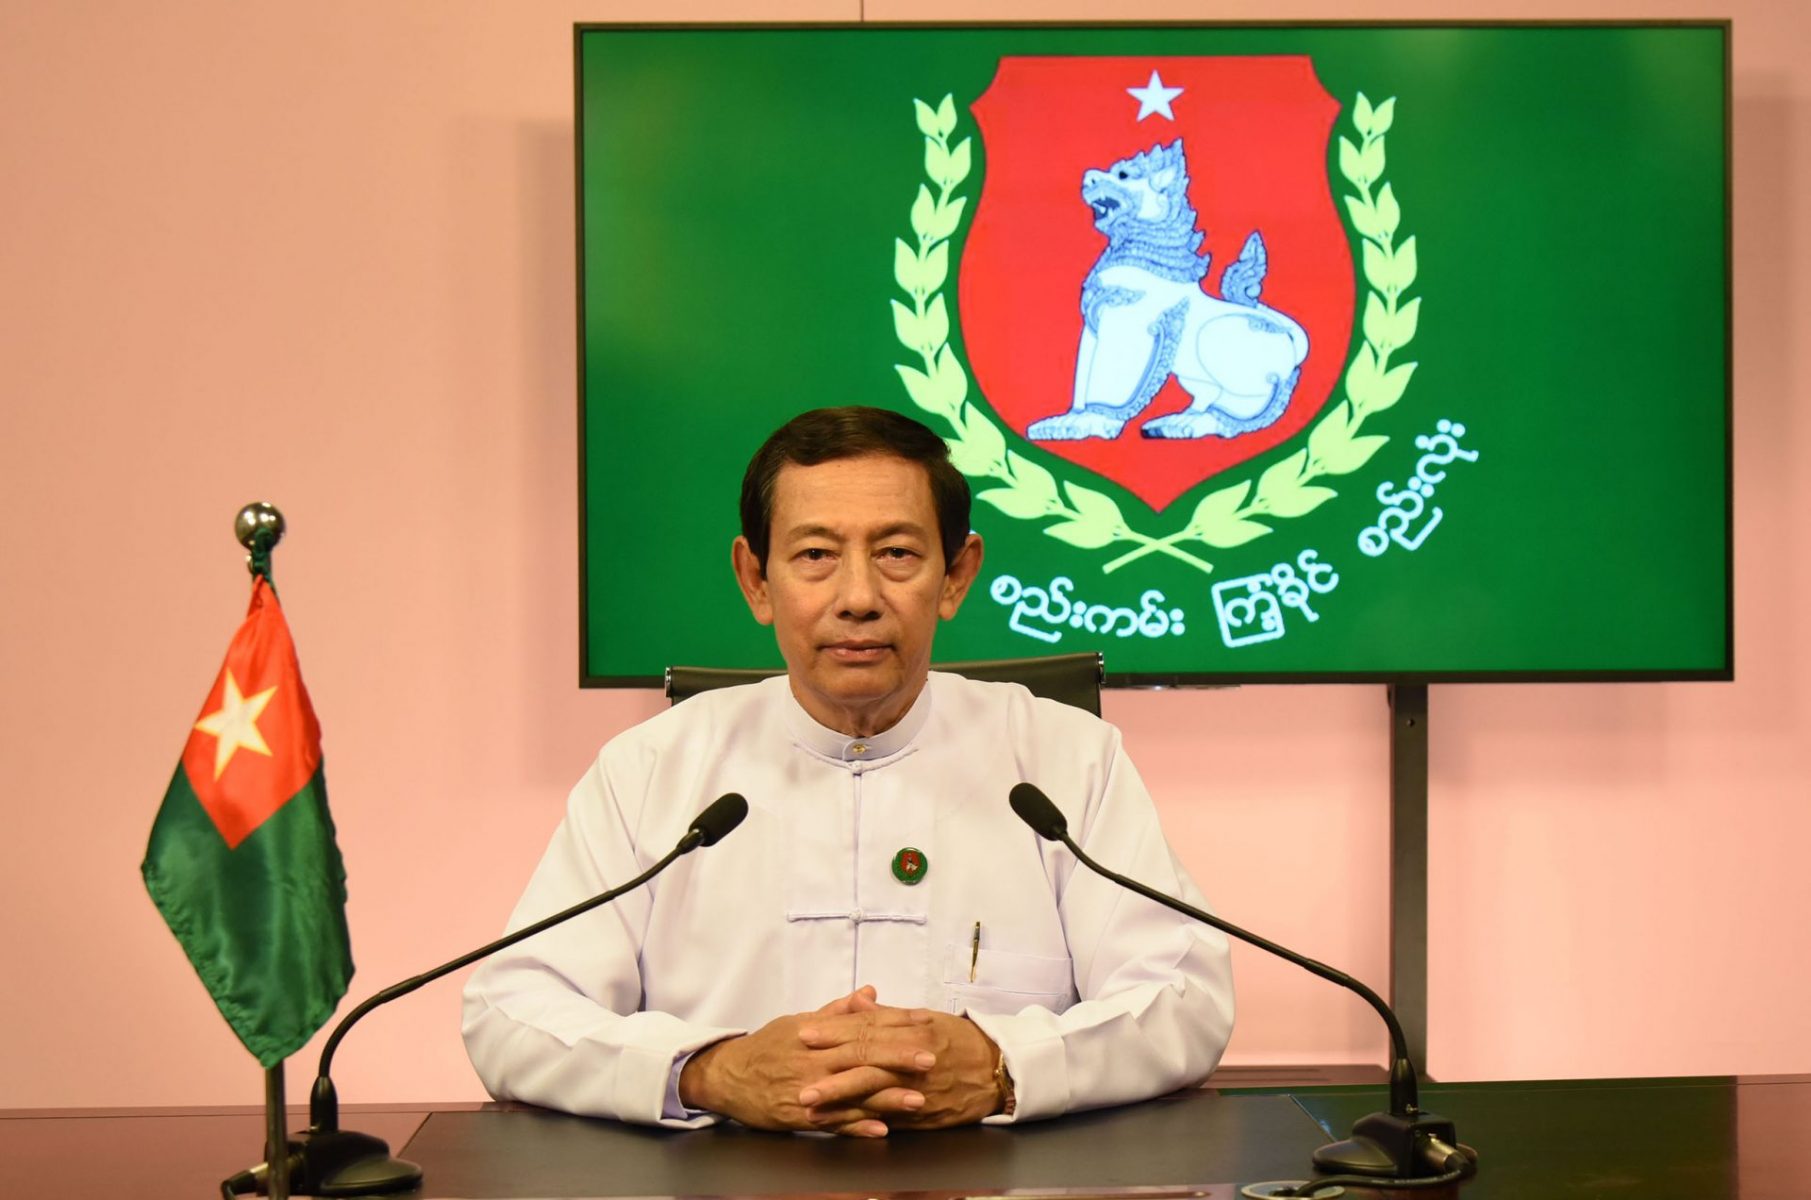 Union Solidarity And Development Party – USDP Presents Its Policy, Stance  And Work Programmes - Global New Light Of Myanmar